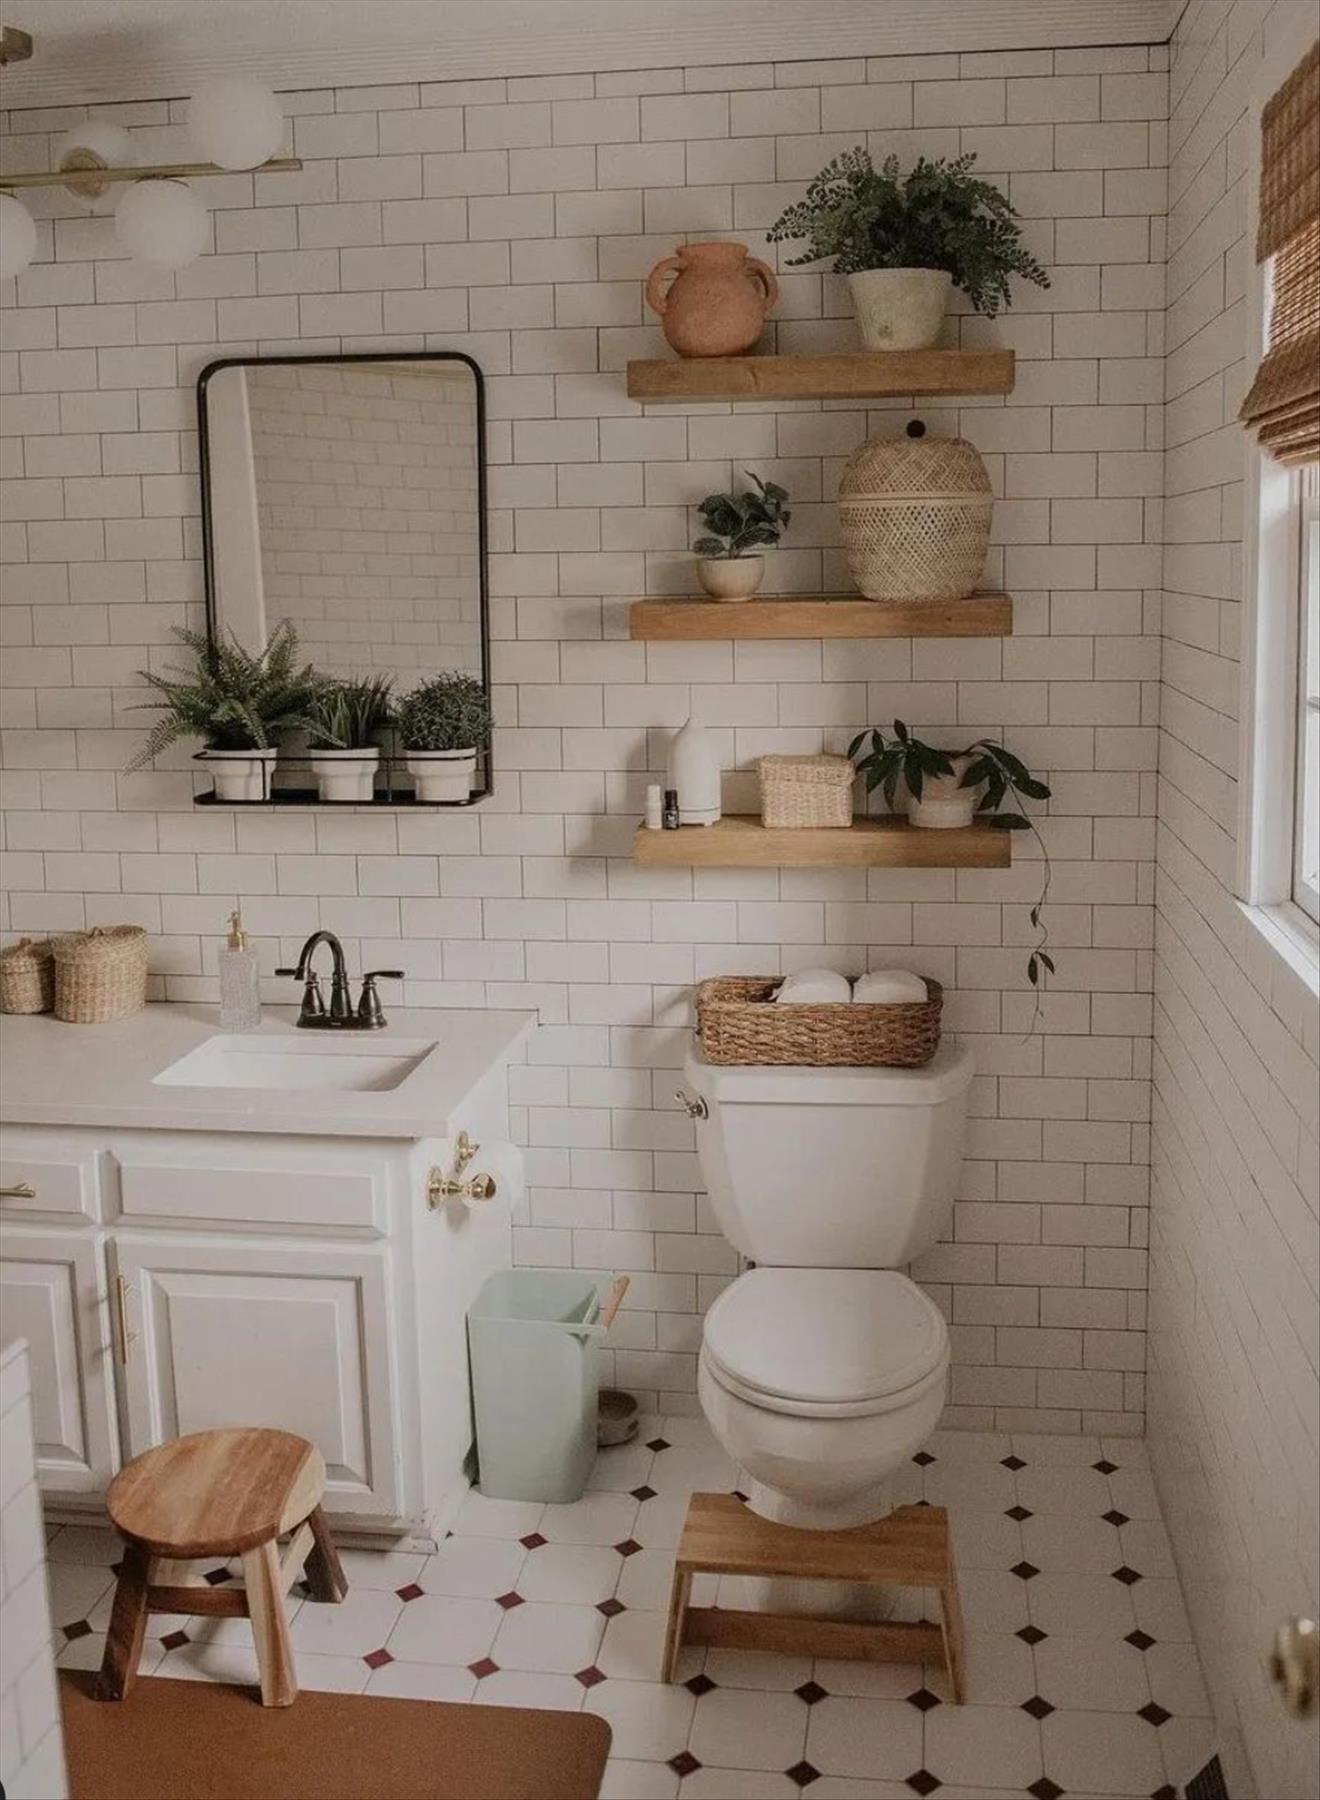 Let's talk about how to decorate the perfect boho bathroom. I noticed some common themes in the bathroom below. They feature houseplants, bamboo wood trim, and teal cabinets or tiles. Keep this in mind when looking for trends in boho bathroom design. Use natural materials and try to keep your decor as unpretentious as possible.